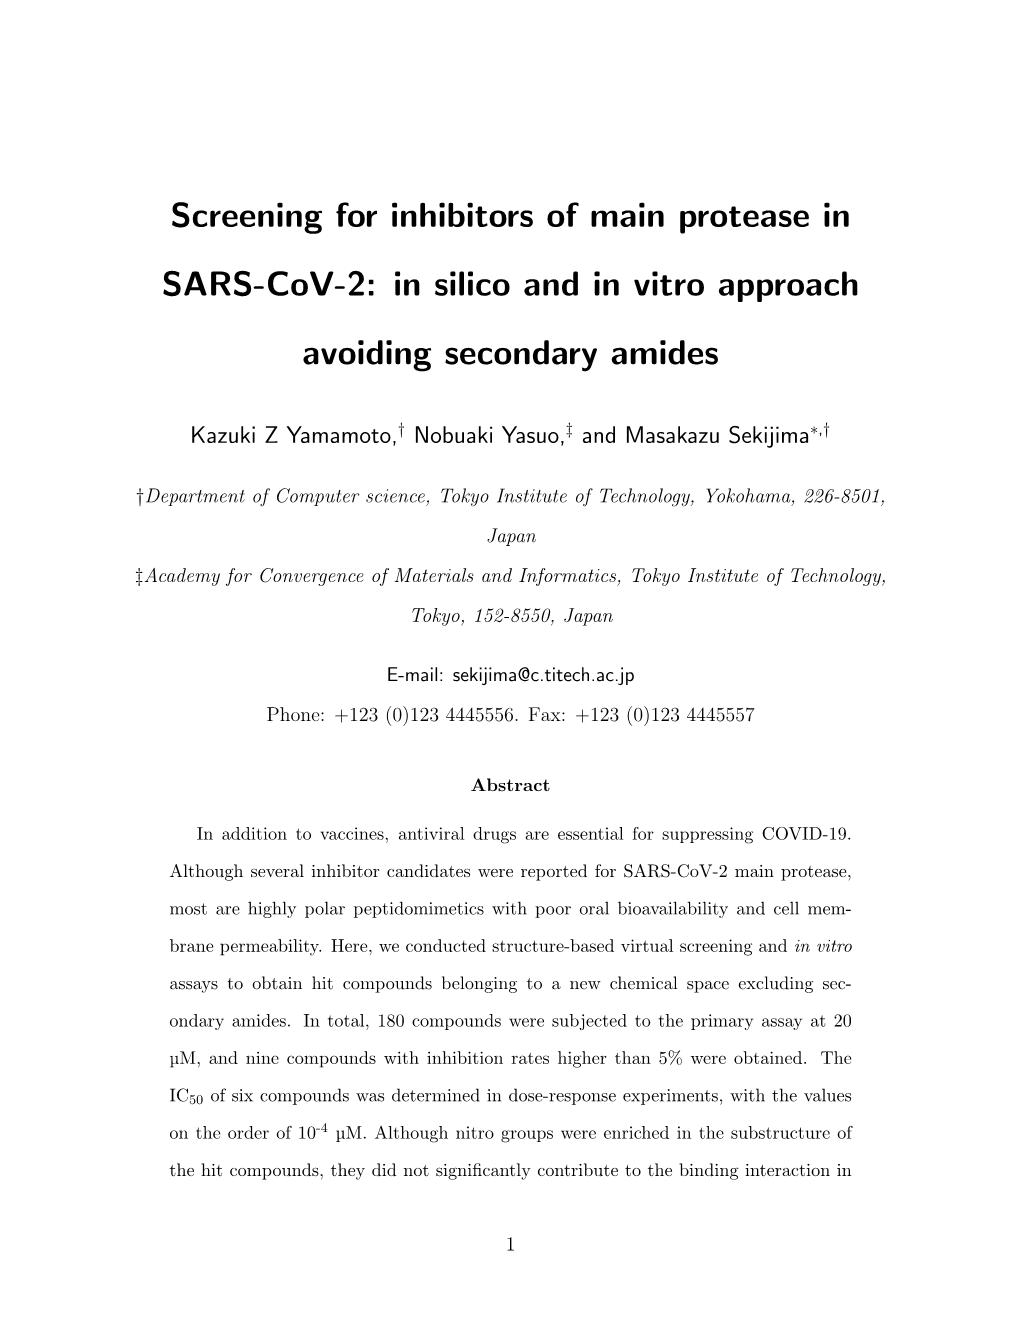 Screening for Inhibitors of Main Protease in SARS-Cov-2: in Silico and in Vitro Approach Avoiding Secondary Amides